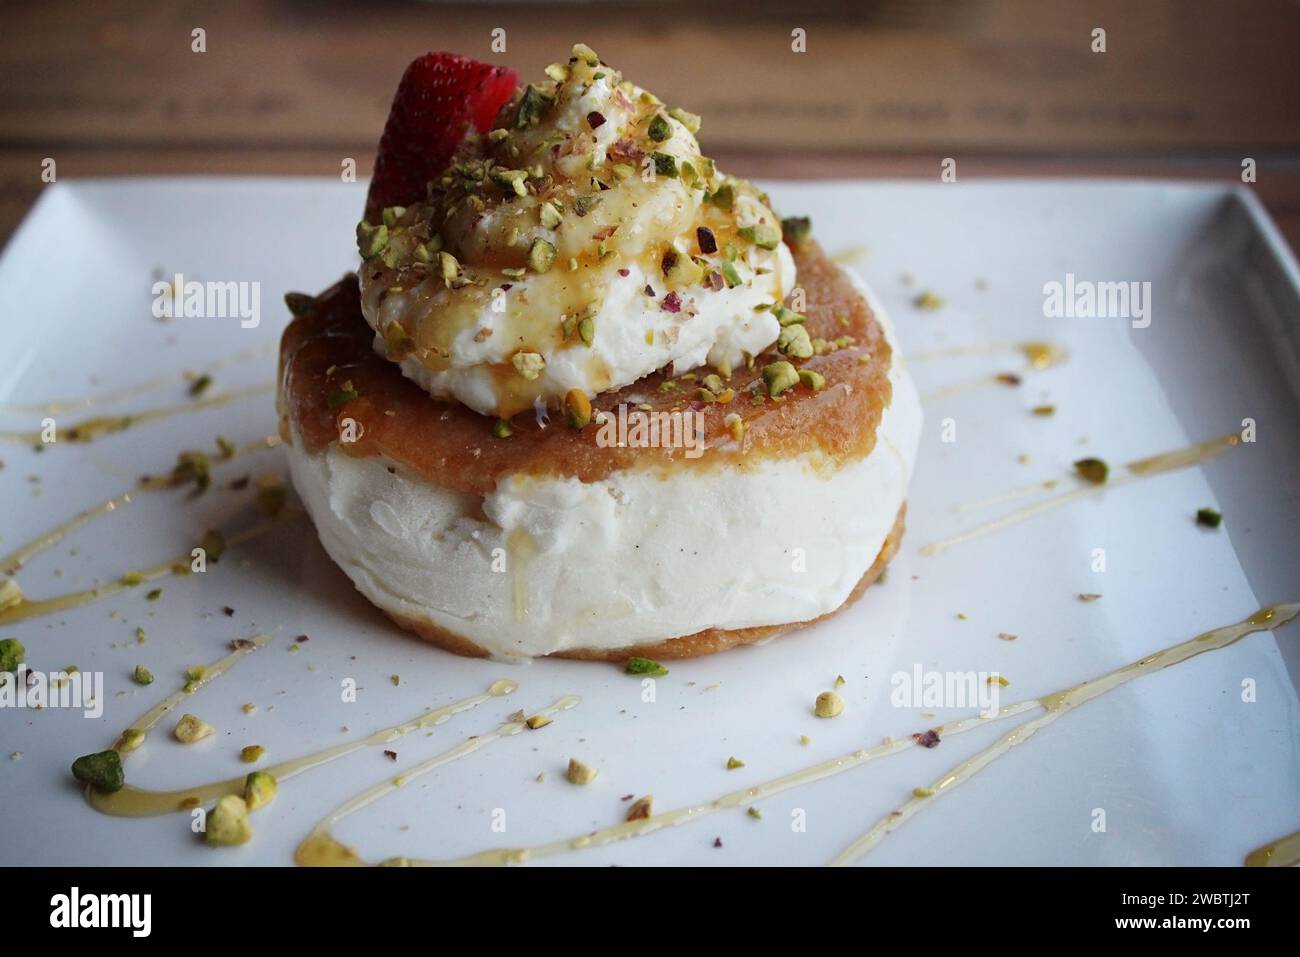 A Lebanese dessert made of ashta and vanilla ice cream with pistachios and drizzled with honey. Stock Photo